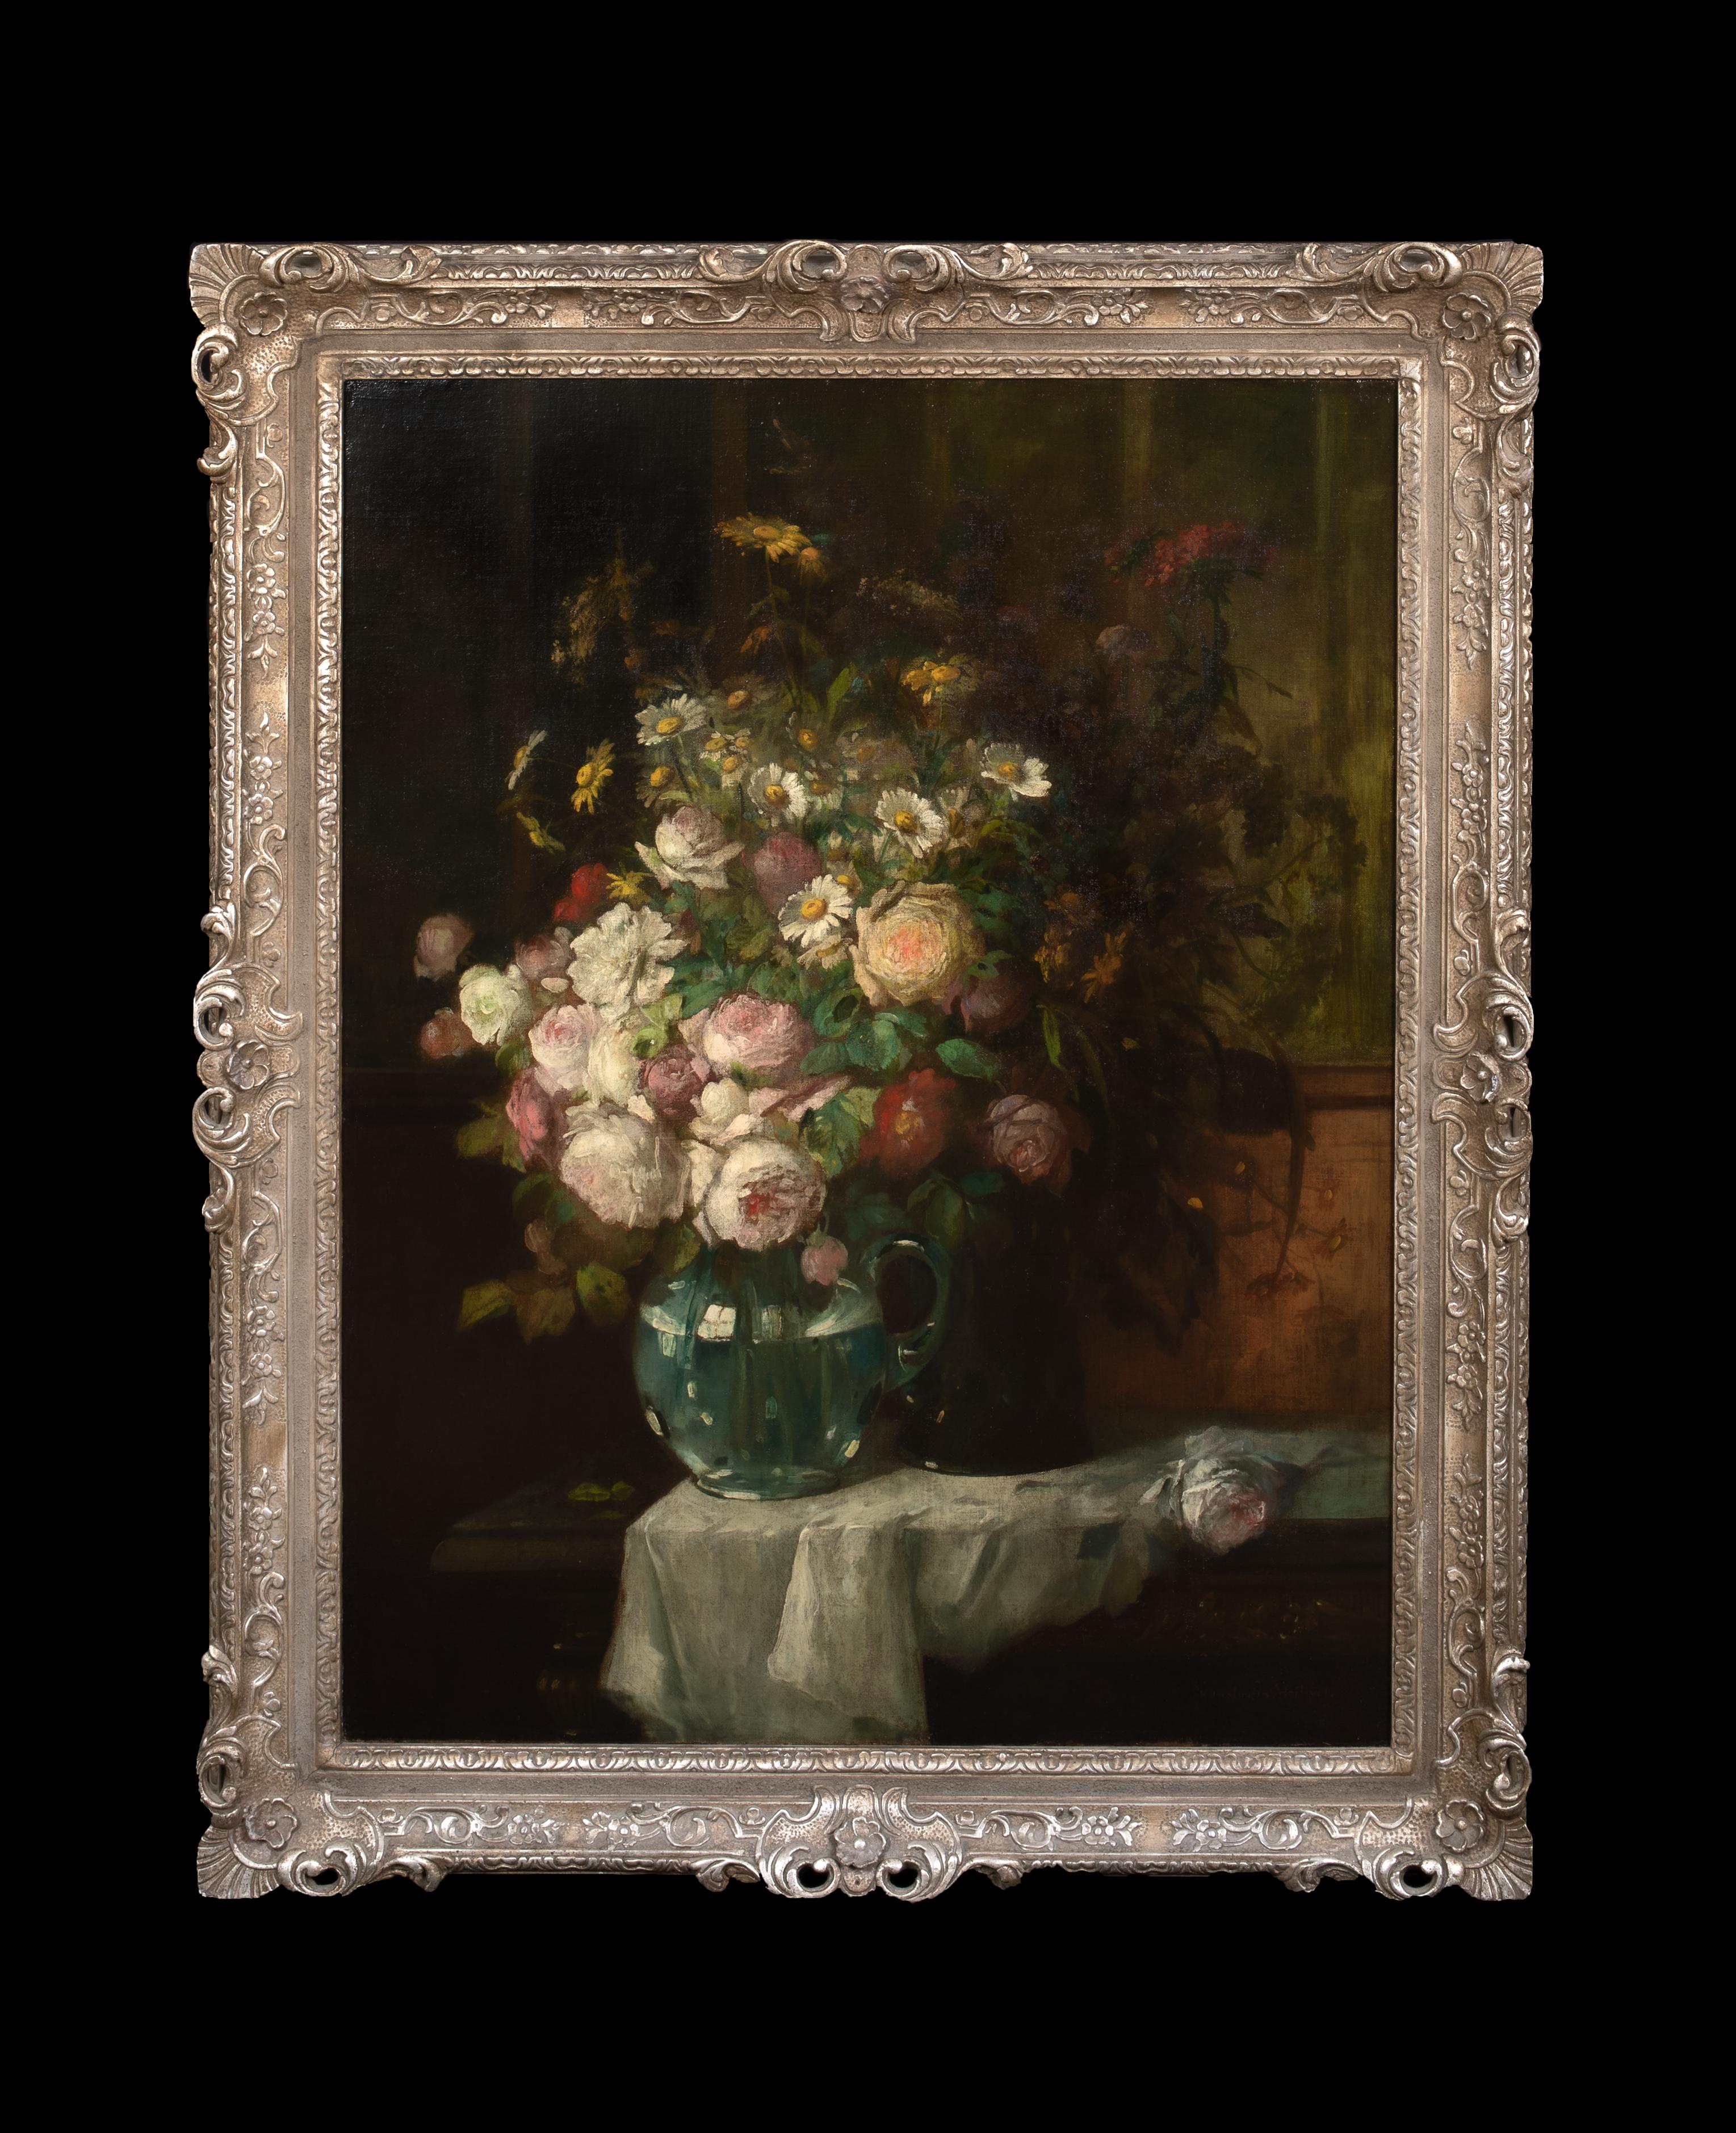 Still Life Of Flower In A Glass Vase, 19th Century

by KONSTANTIN STOITZNER (1863-1934)

Large 19th Century Austrian Impressionist Still Life of various summer flowers in a glass vase upon a mantle, oil on canvas by Konstantin Stoitzner. Leading